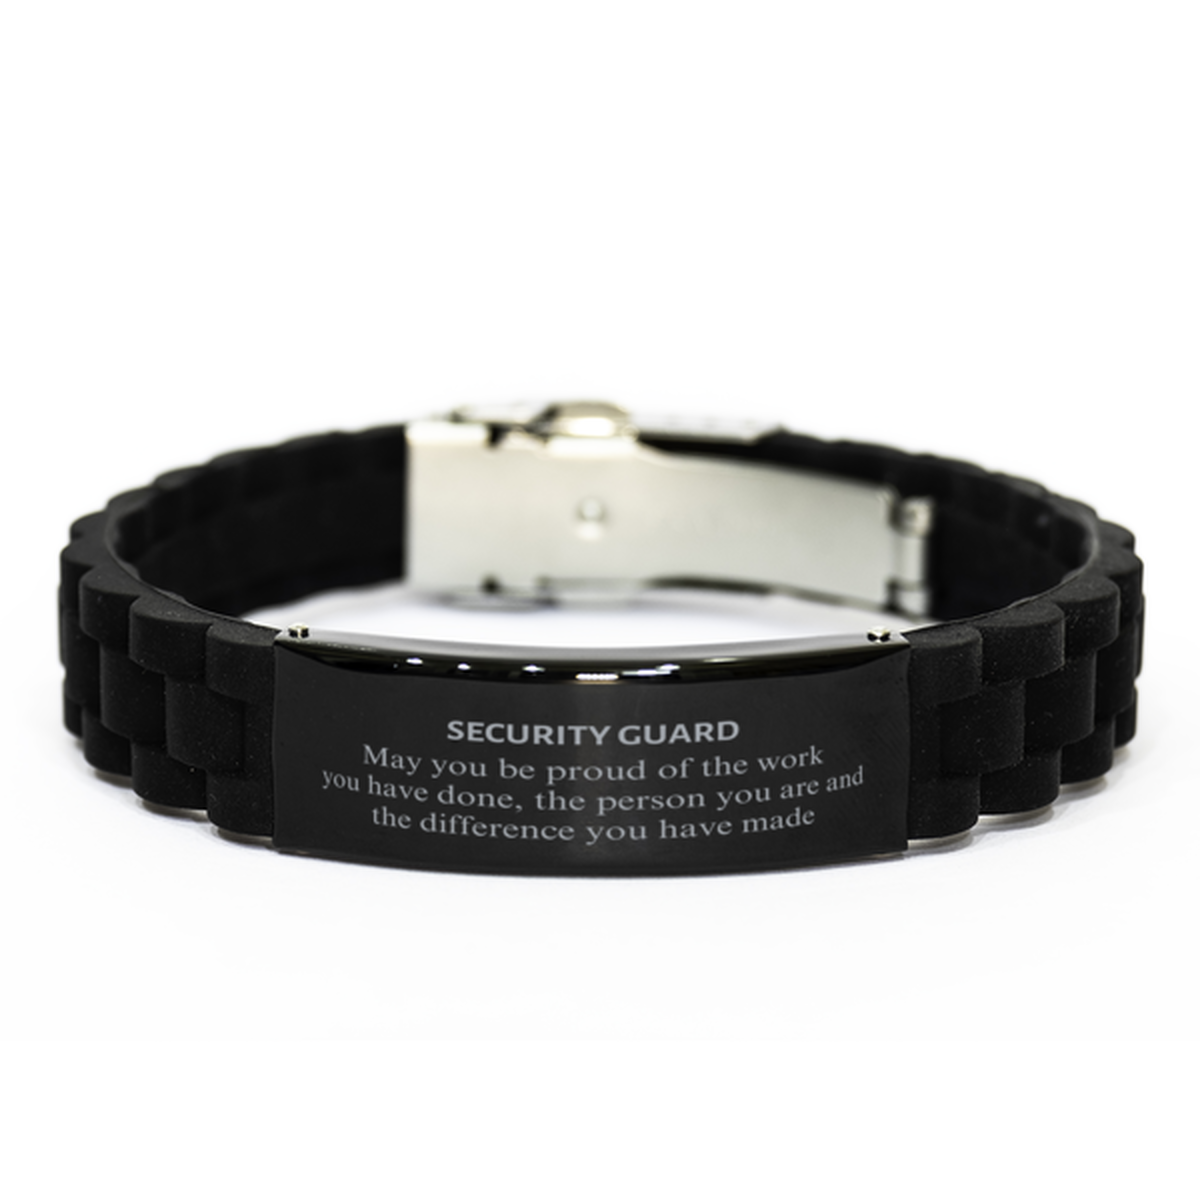 Security Guard May you be proud of the work you have done, Retirement Security Guard Black Glidelock Clasp Bracelet for Colleague Appreciation Gifts Amazing for Security Guard